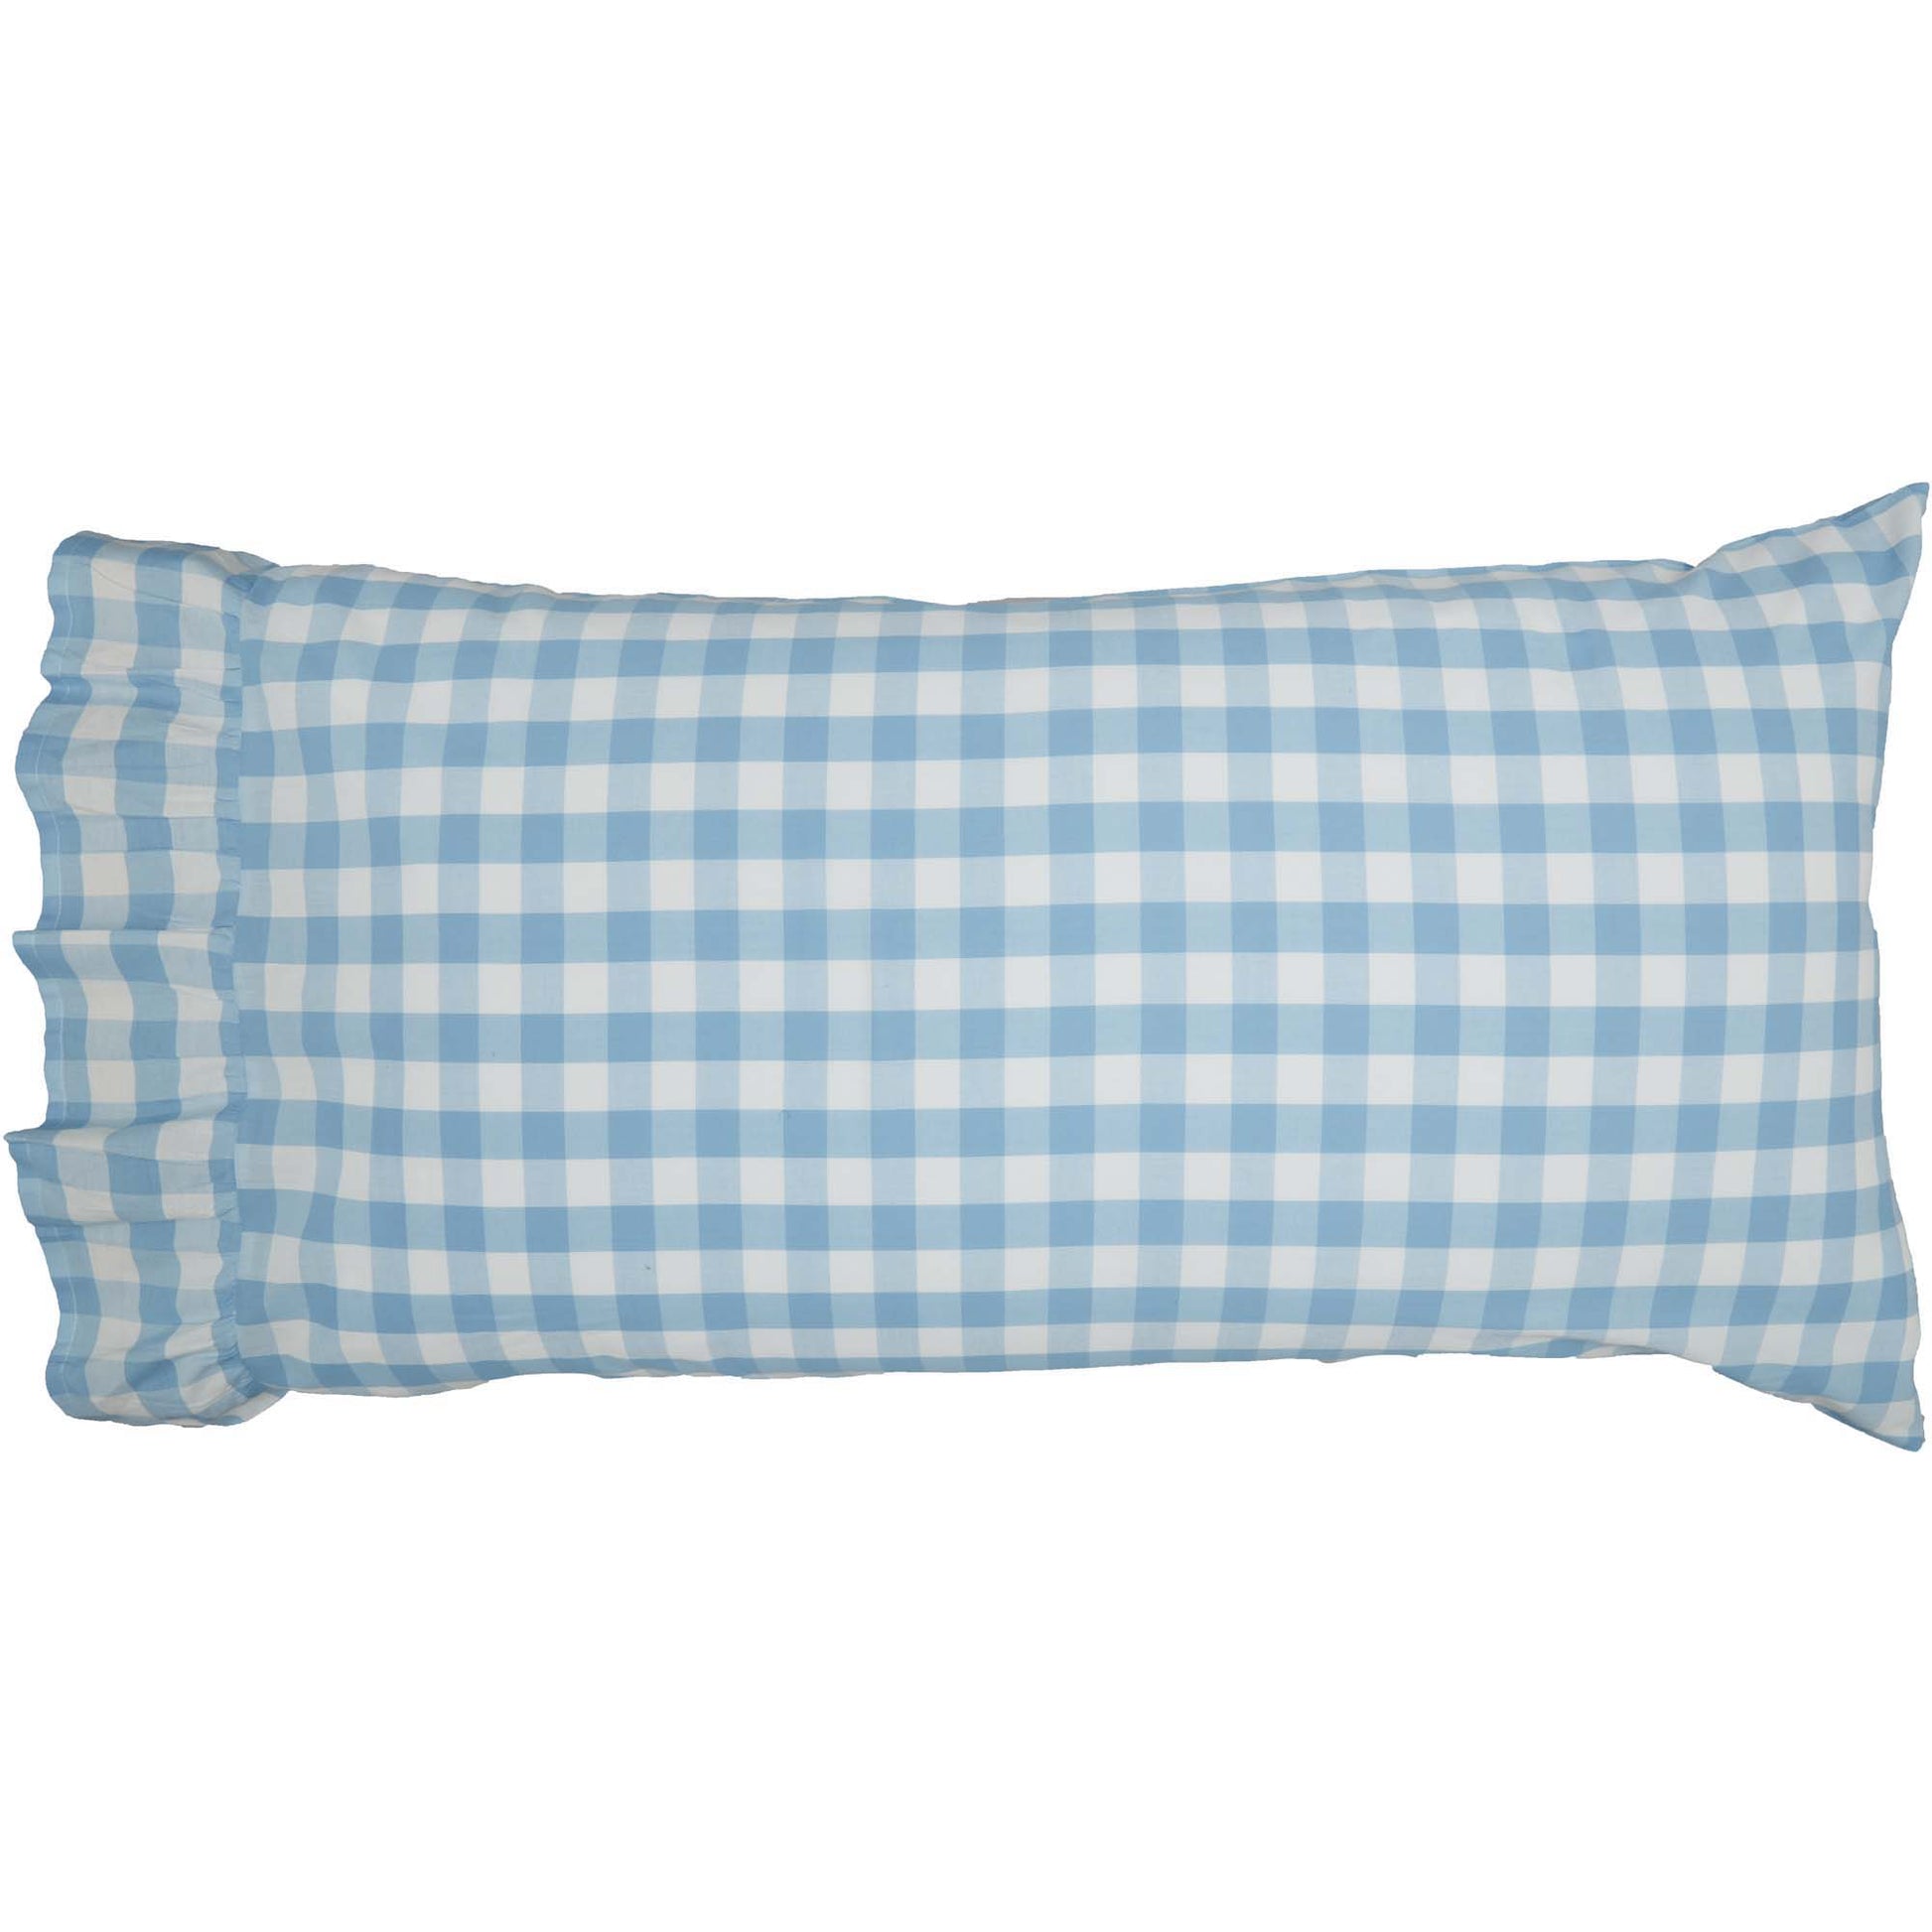 69893-Annie-Buffalo-Blue-Check-King-Pillow-Case-Set-of-2-21x36-4-image-4